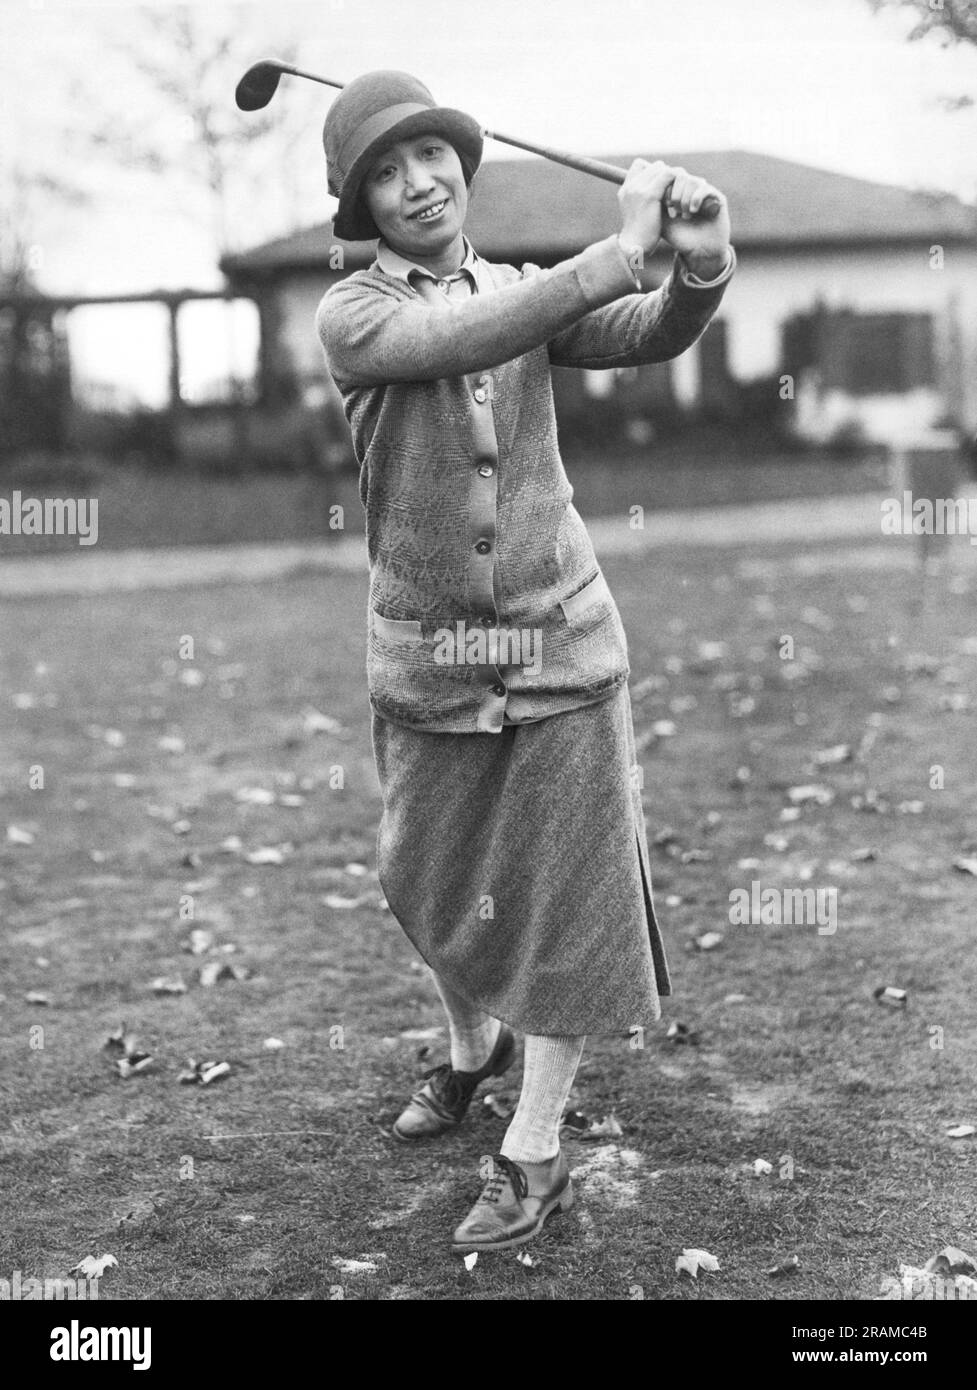 Rye, New York:  November 5, 1925 Princess Asaka, sister of the Empress of Japan amd wife of Prince Asaka, shows her form on the golf course at the Westchester-Biltmore Country Club. Stock Photo